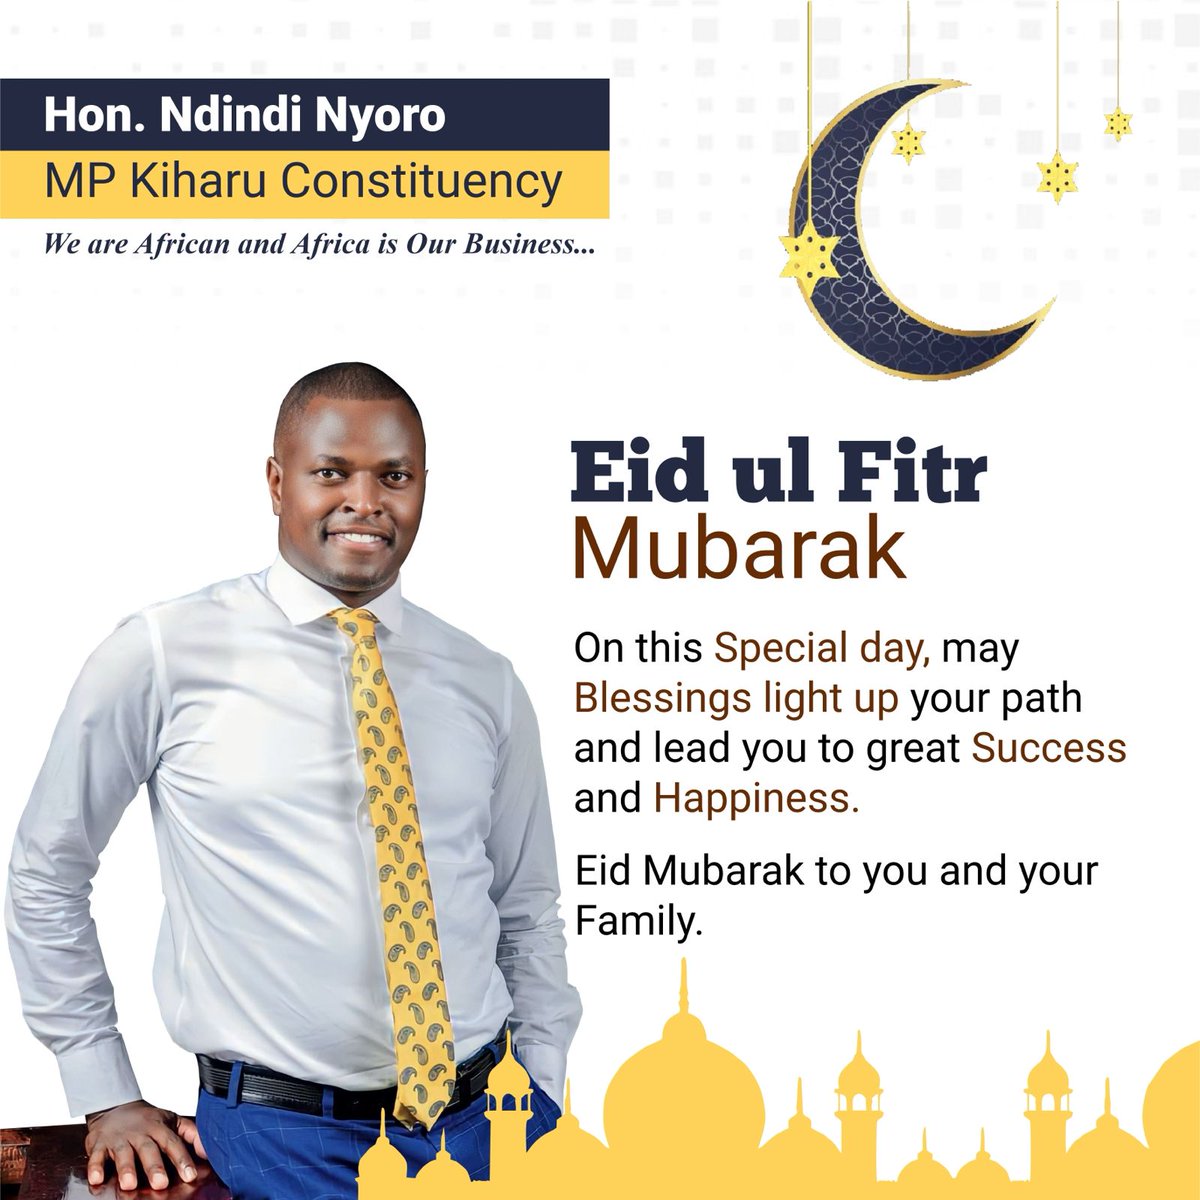 May Blessings light up your path and lead to Great Success and Happiness. Wishing you all a Blessed Eid ul Fitr. Eid Mubarak. We are African and Africa is our Business..